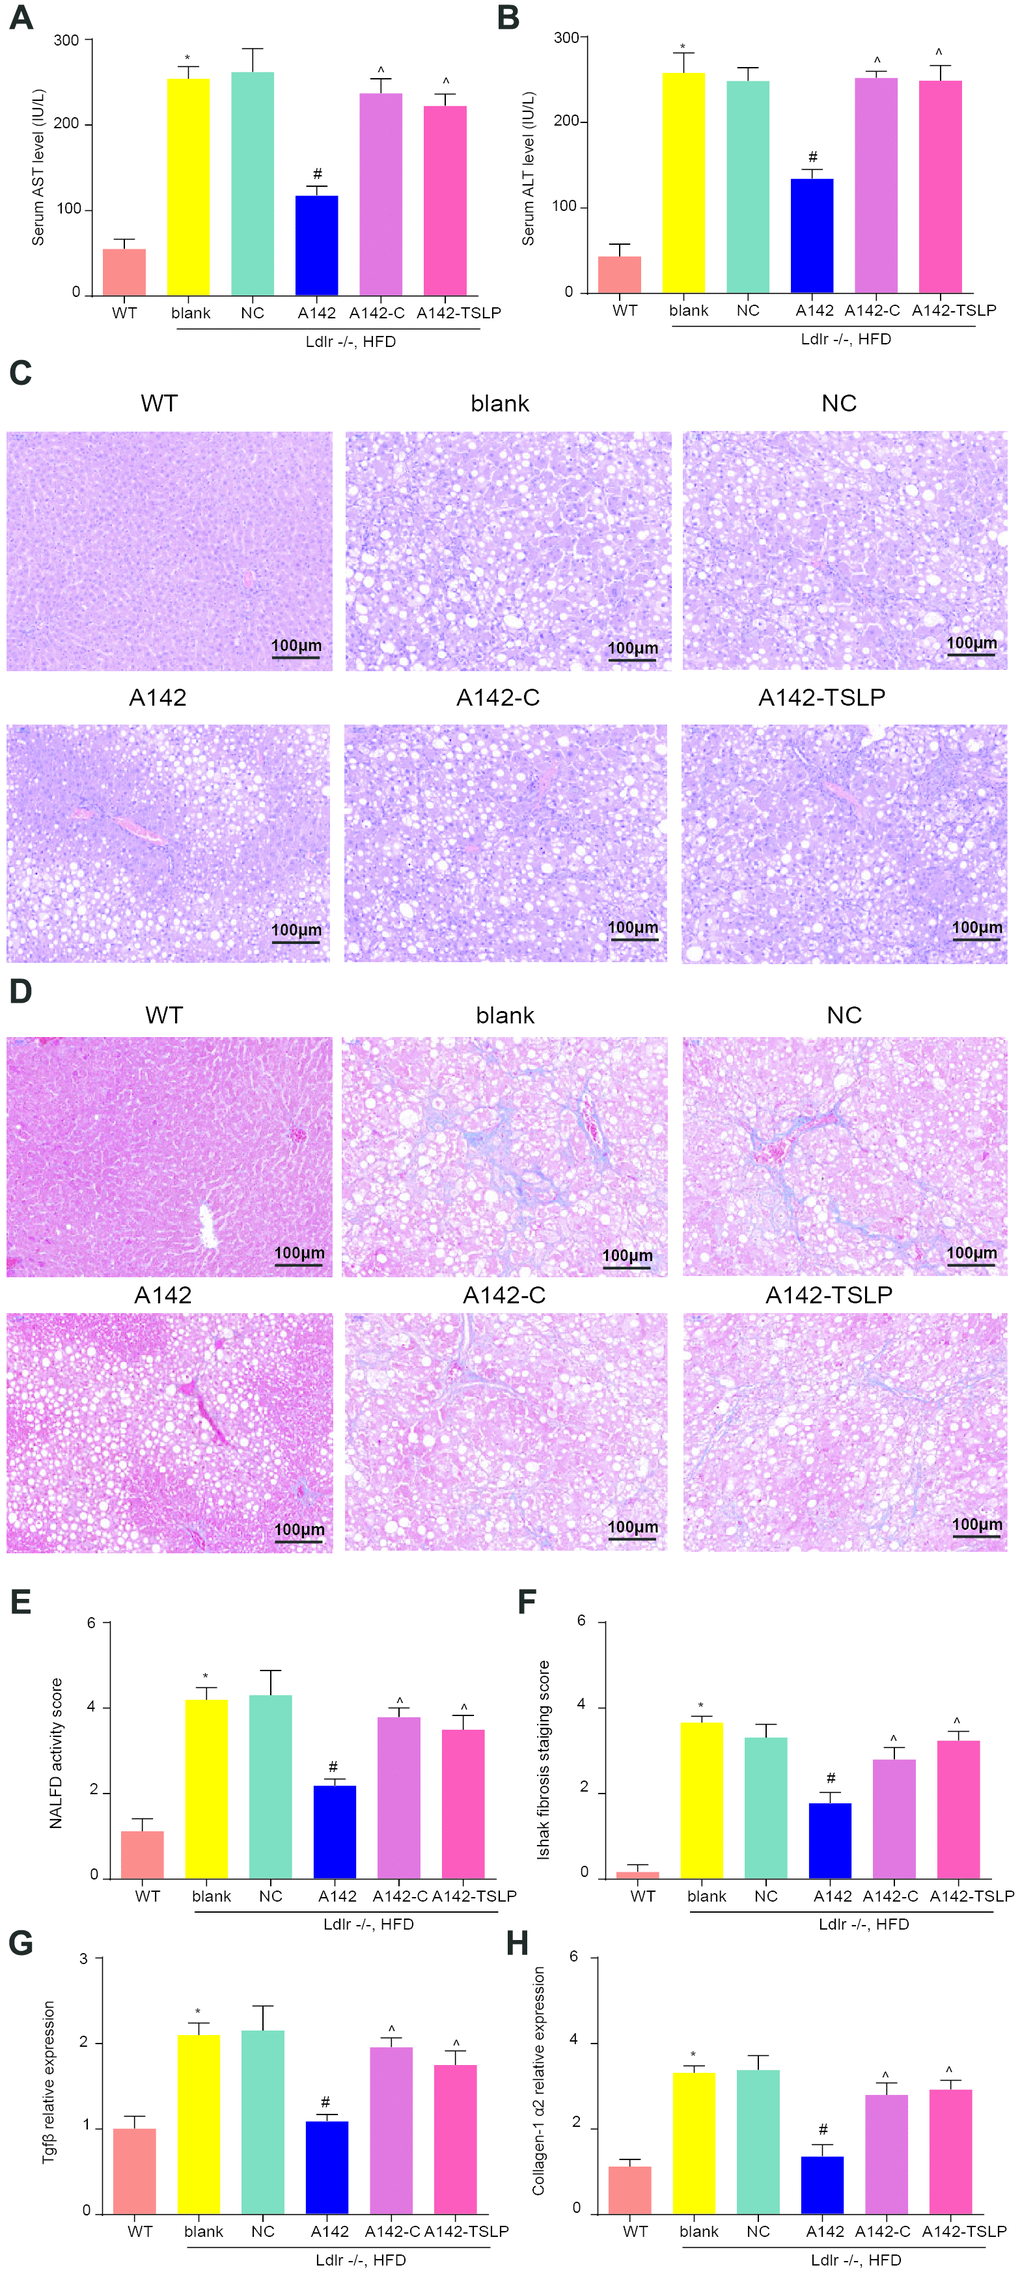 miR-142-5p reduced liver injury, liver fatty degeneration and liver fibrosis, which could be rescued by JAK-STAT signaling pathway activator or AAV/TSLP. (A) The level of alanine aminotransferase (ALT) secreted into serum. (B) The level of aspartate aminotransferase (AST) secreted into serum. (C, E) H&E staining for liver fatty degeneration. Original magnification ×200. (D, F) The representative images of collagen deposition in Masson’s trichrome. The expression of fibrosis-related genes. Original magnification ×200. (G) The mRNA expression level of Tgfβ and (H) The mRNA expression level of Collagen-1 α2. *P #P ^P 